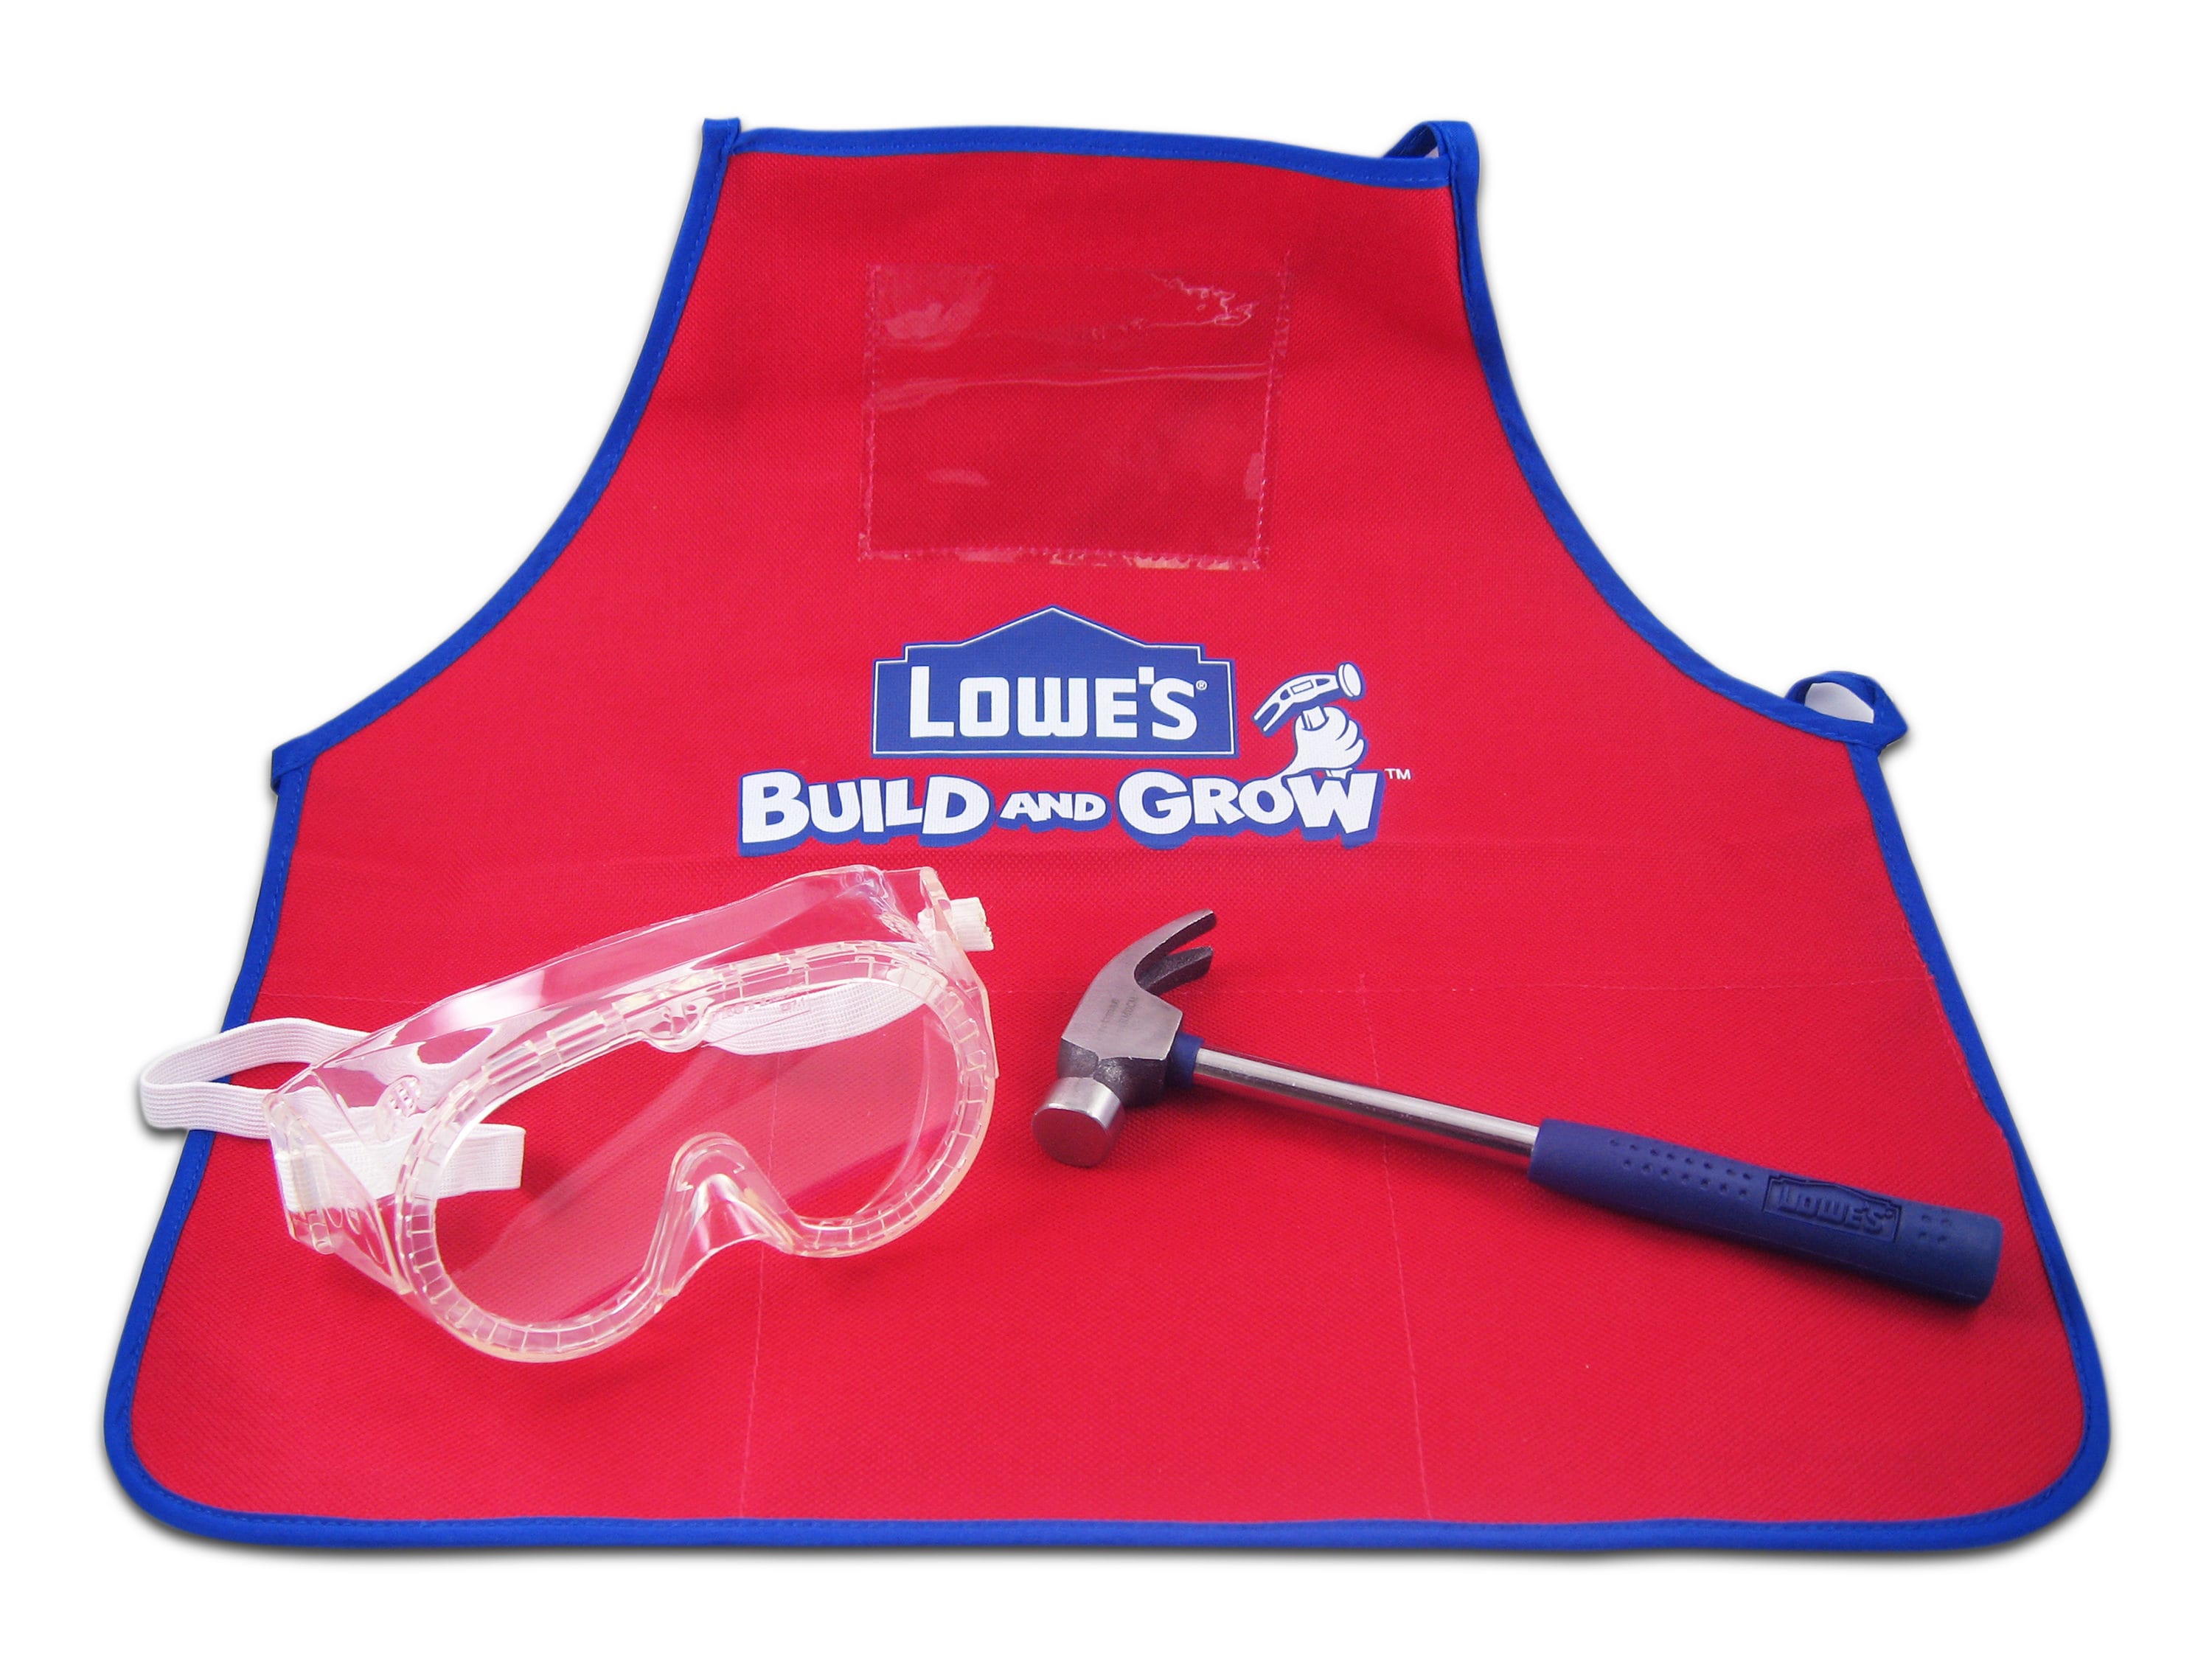 2 New Lowes Build and Grow  Childs Apron Craft Paint Play W/pouch